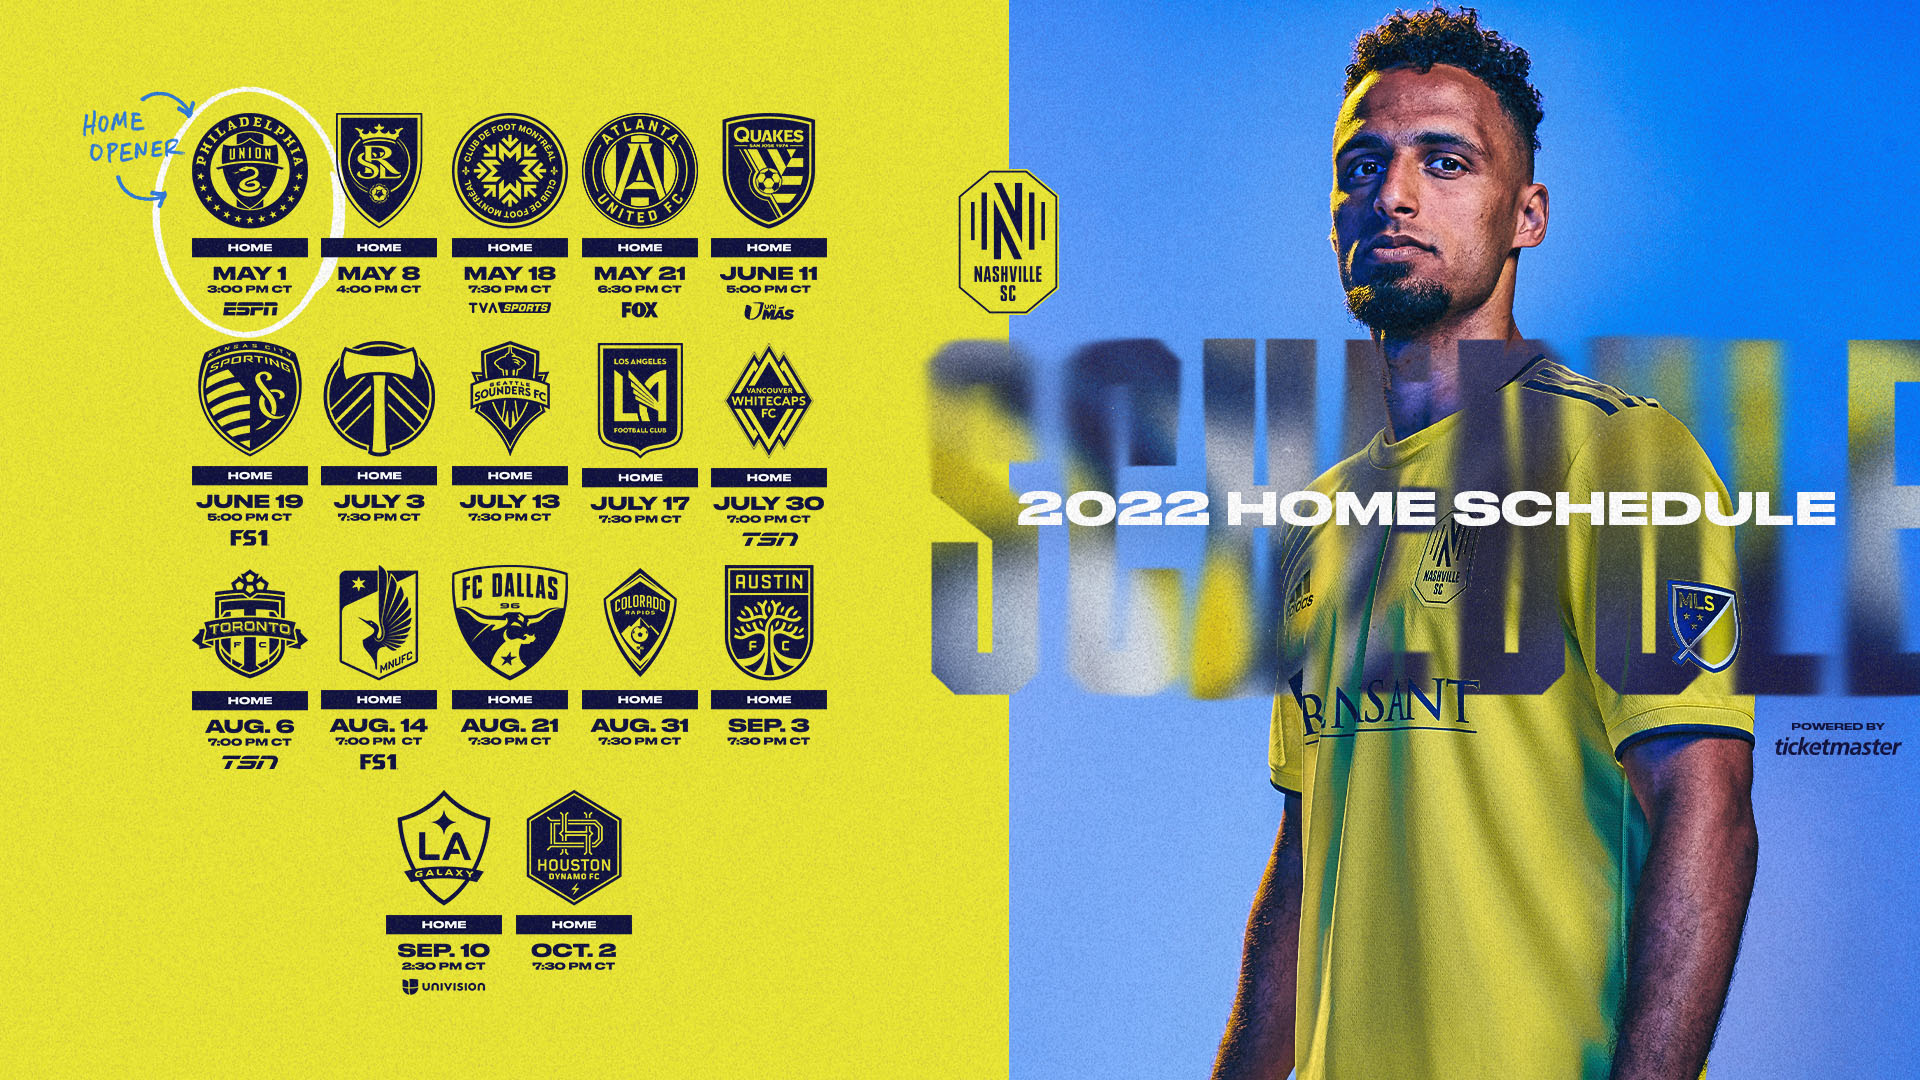 Nashville Sc Schedule 2022 Nashville Sc Releases Full Schedule For 2022 - The Sports Credential